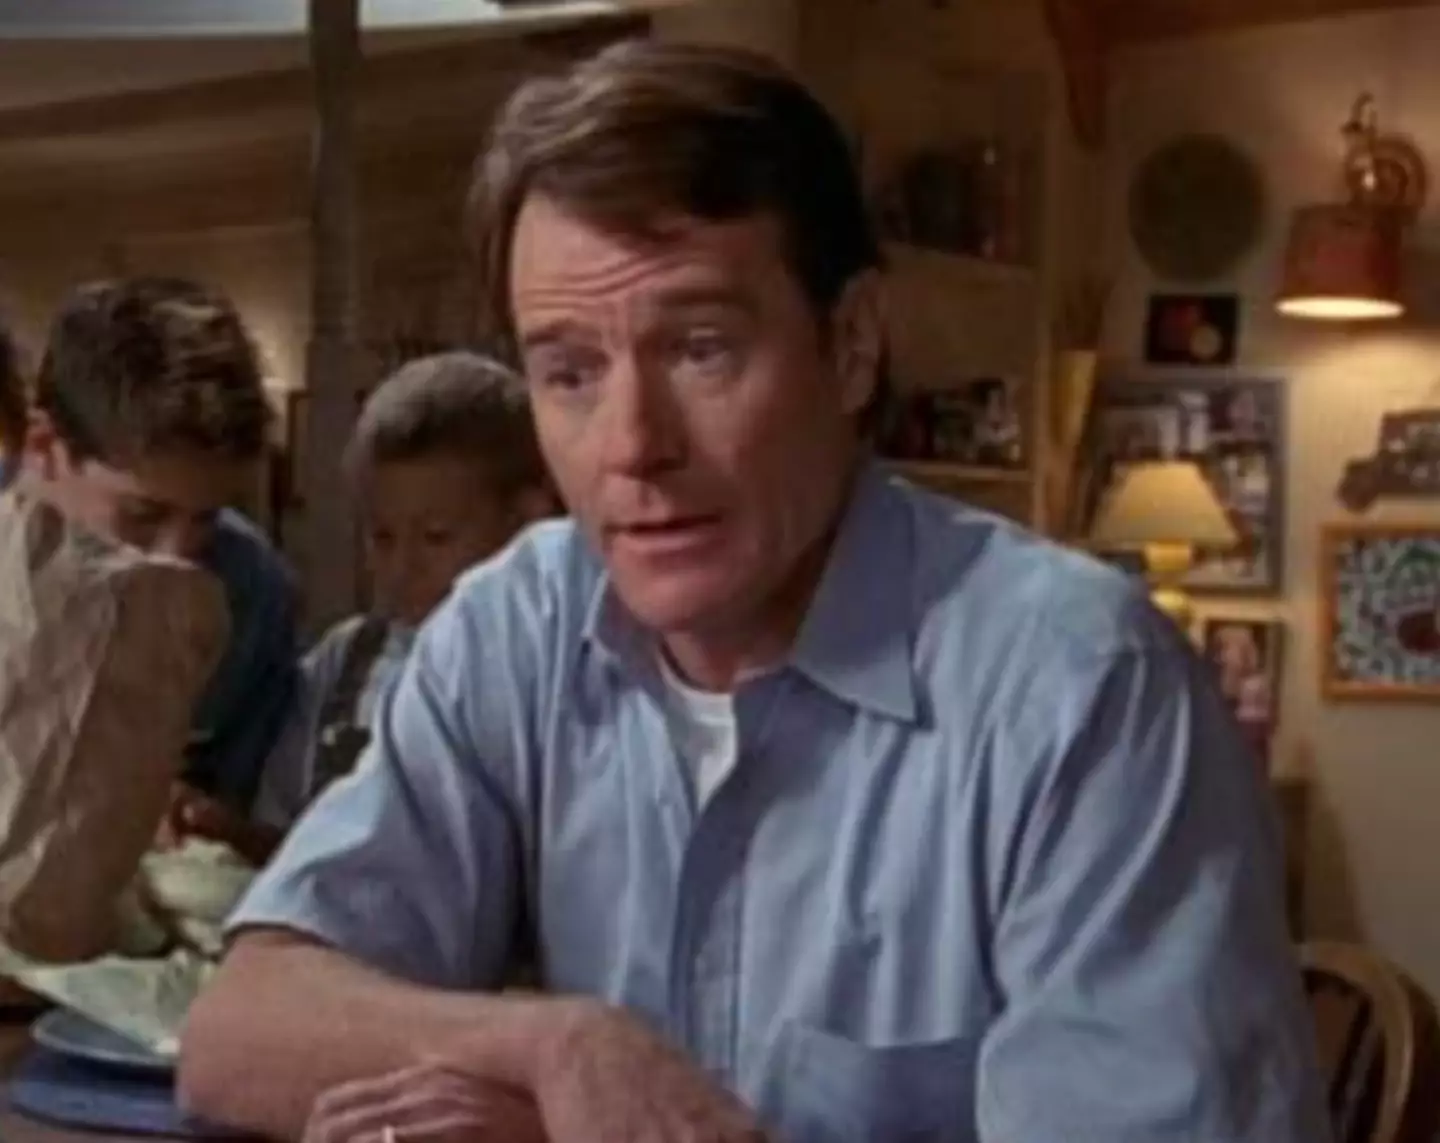 Bryan Cranston played the boys' dad in the series.